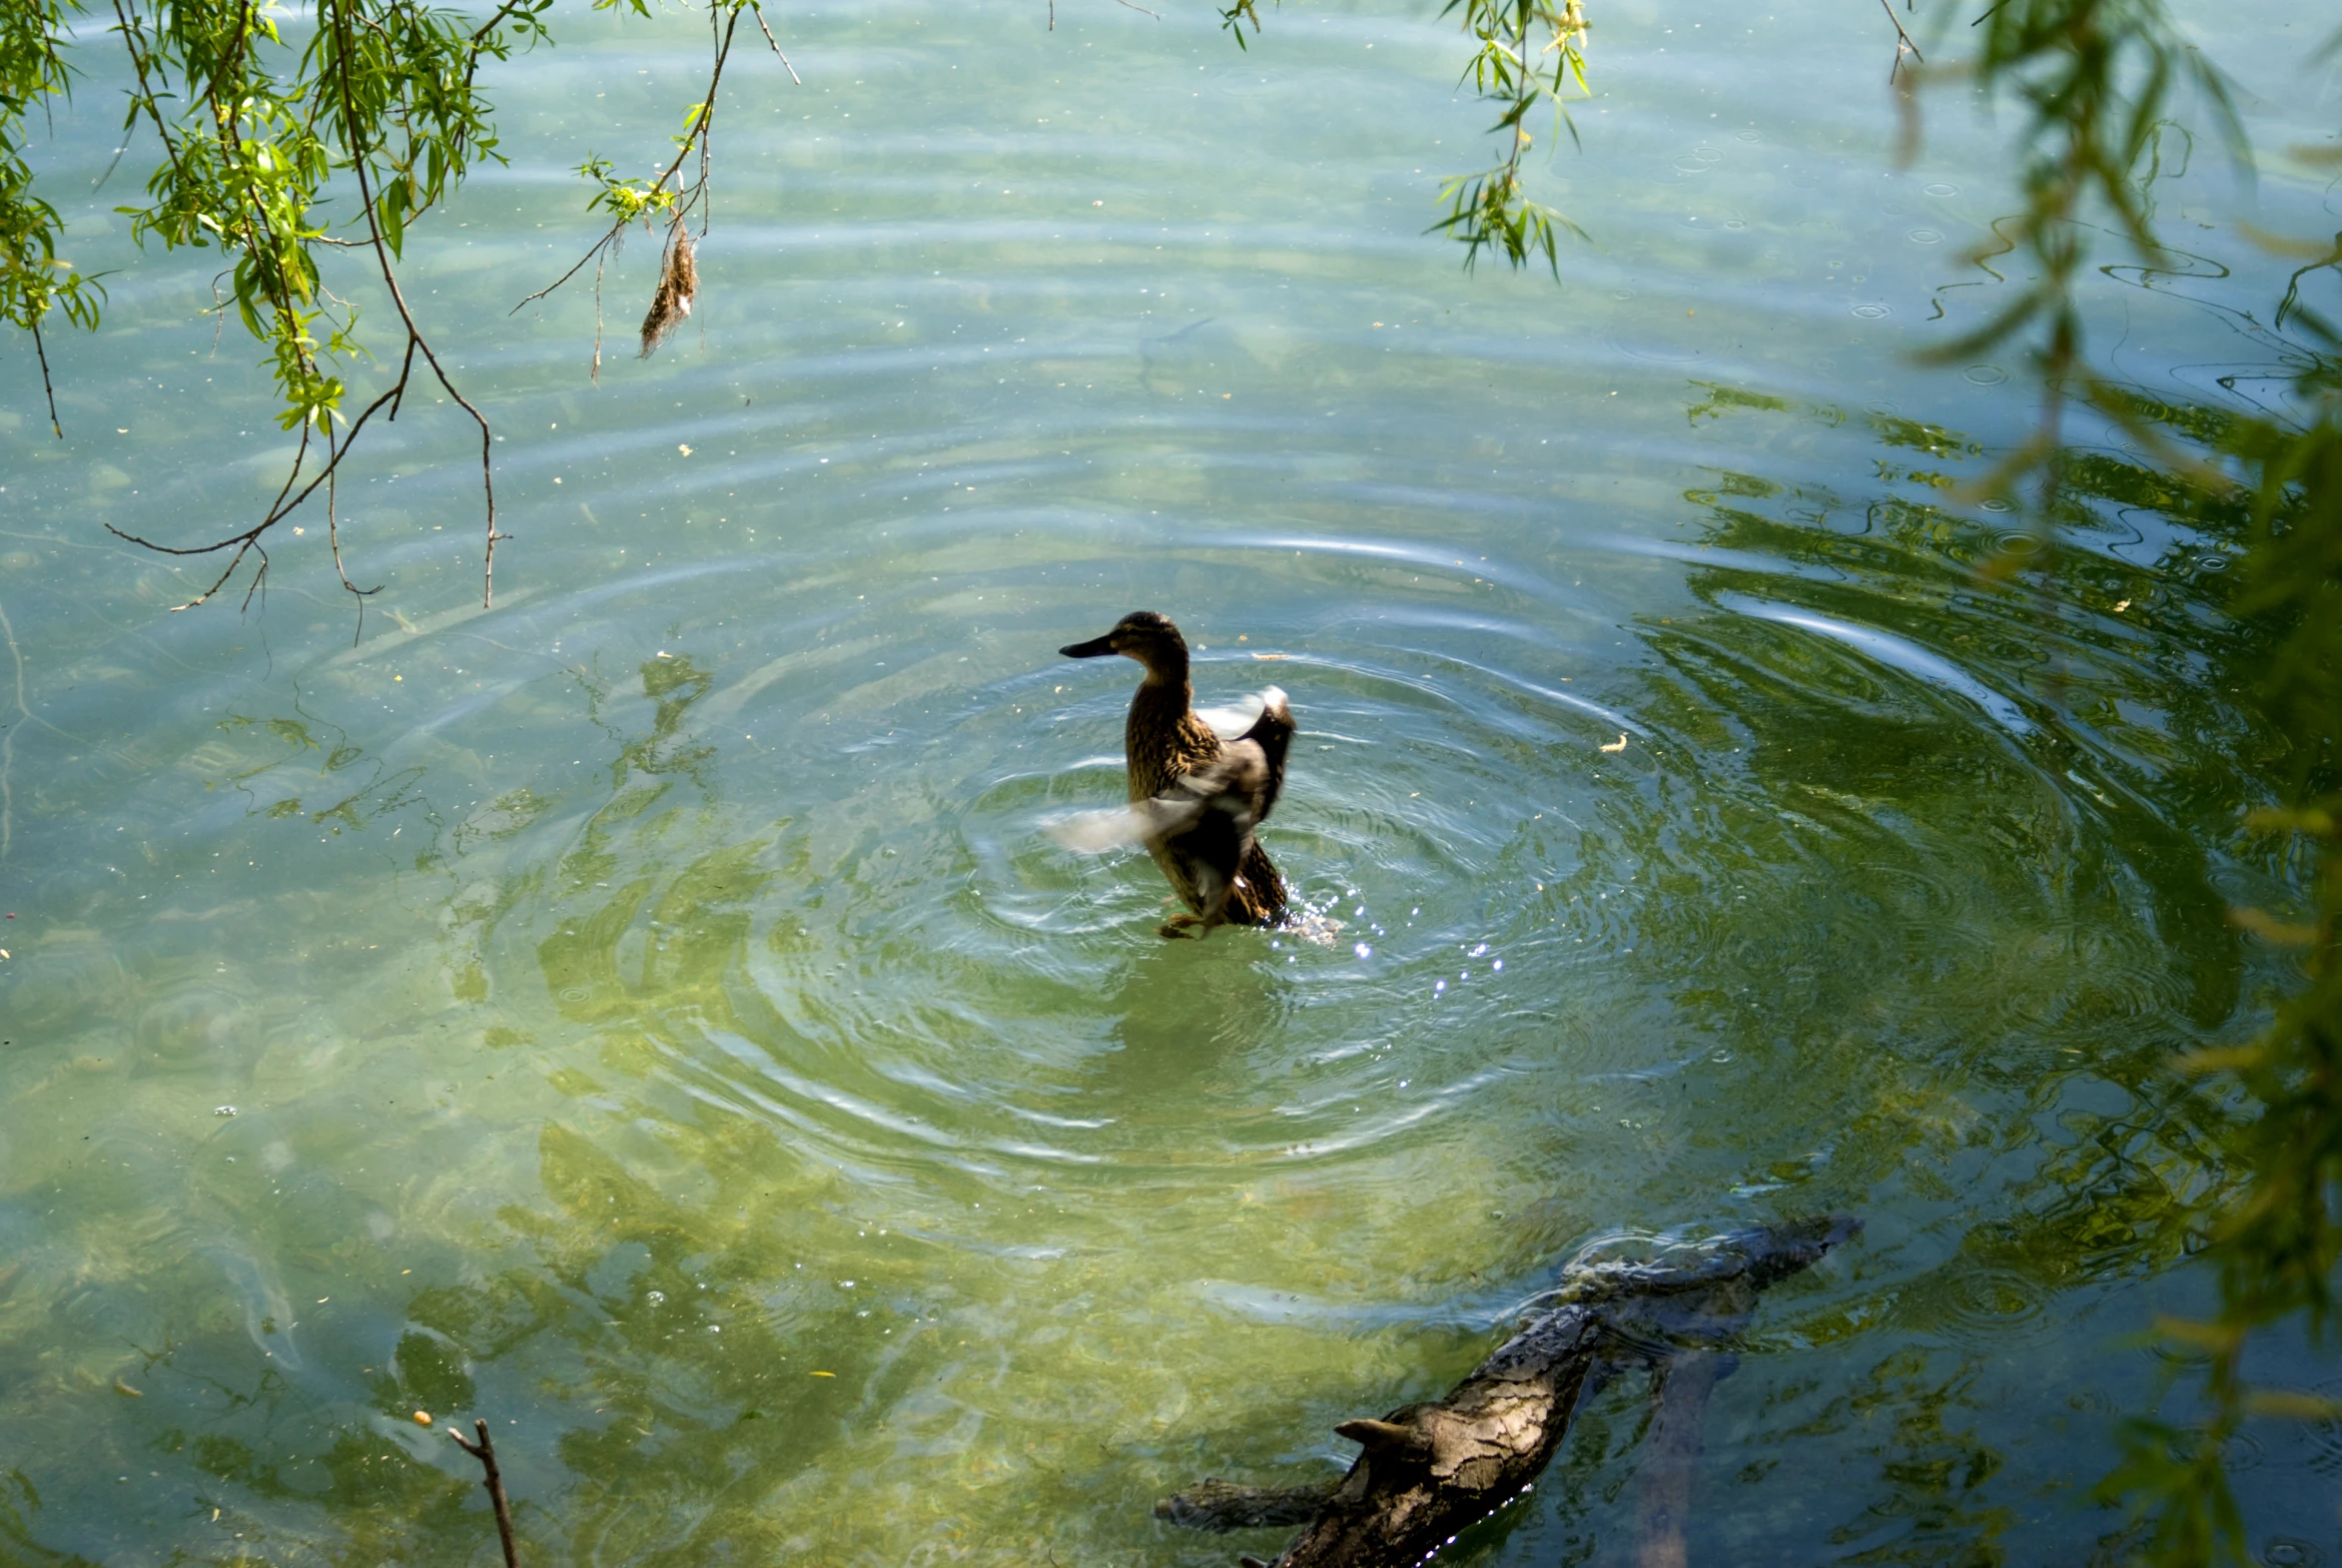 a duck swims near several dead tree nches in the water